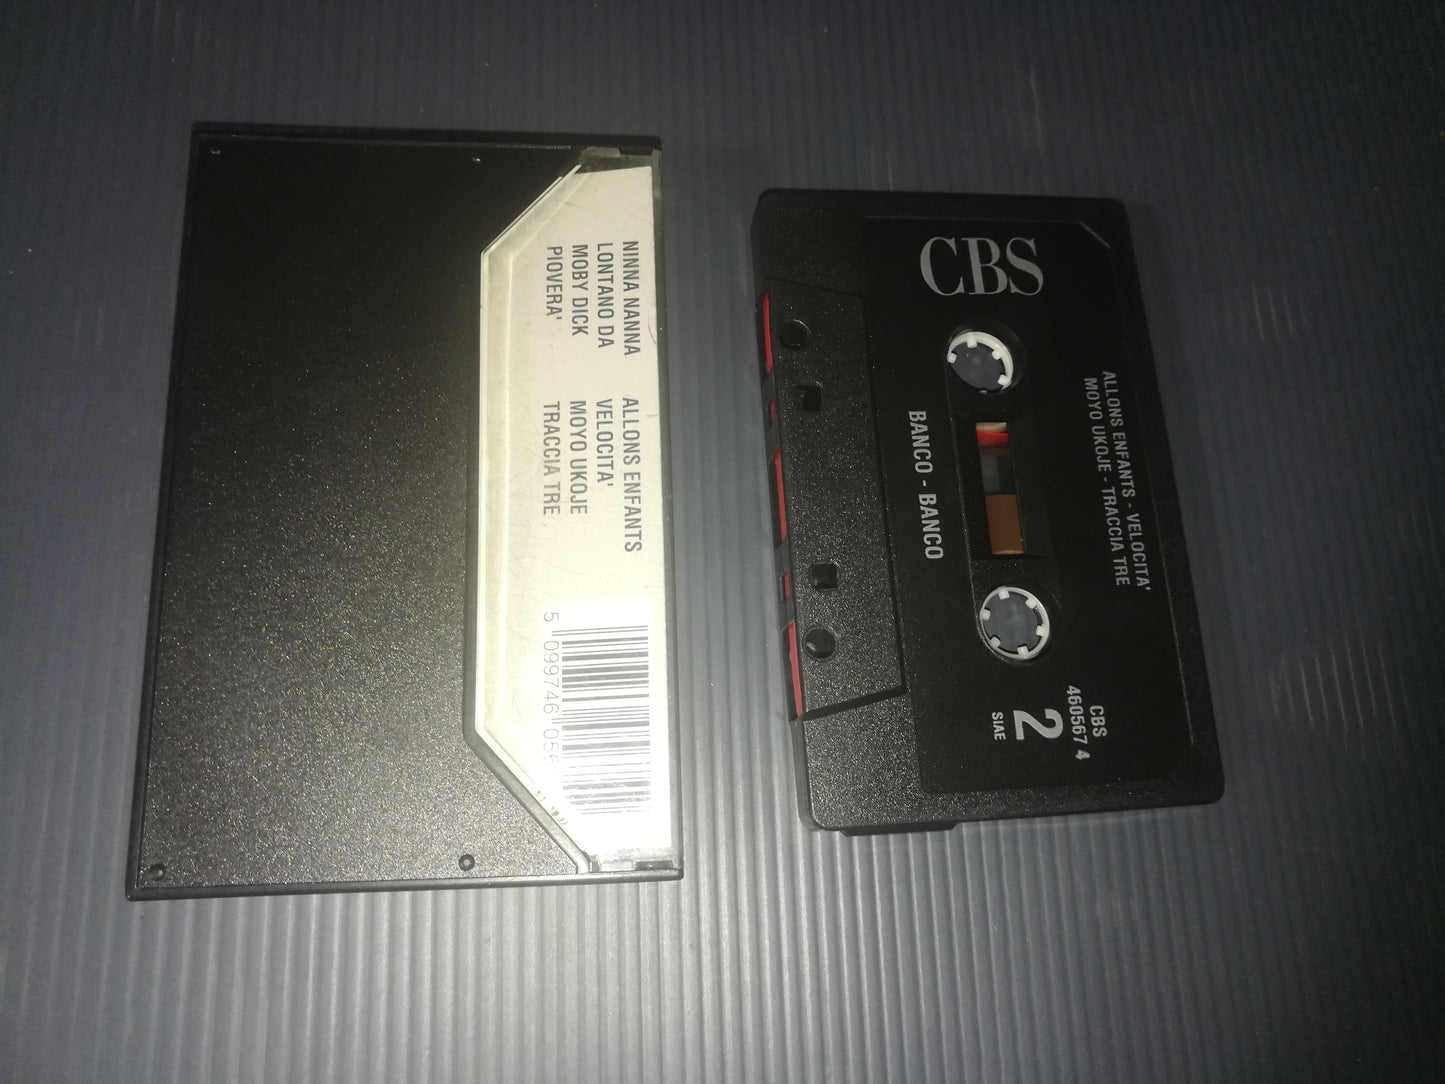 Banco" Cassette Bench

 Published in 1990 by CBS code 460567 4